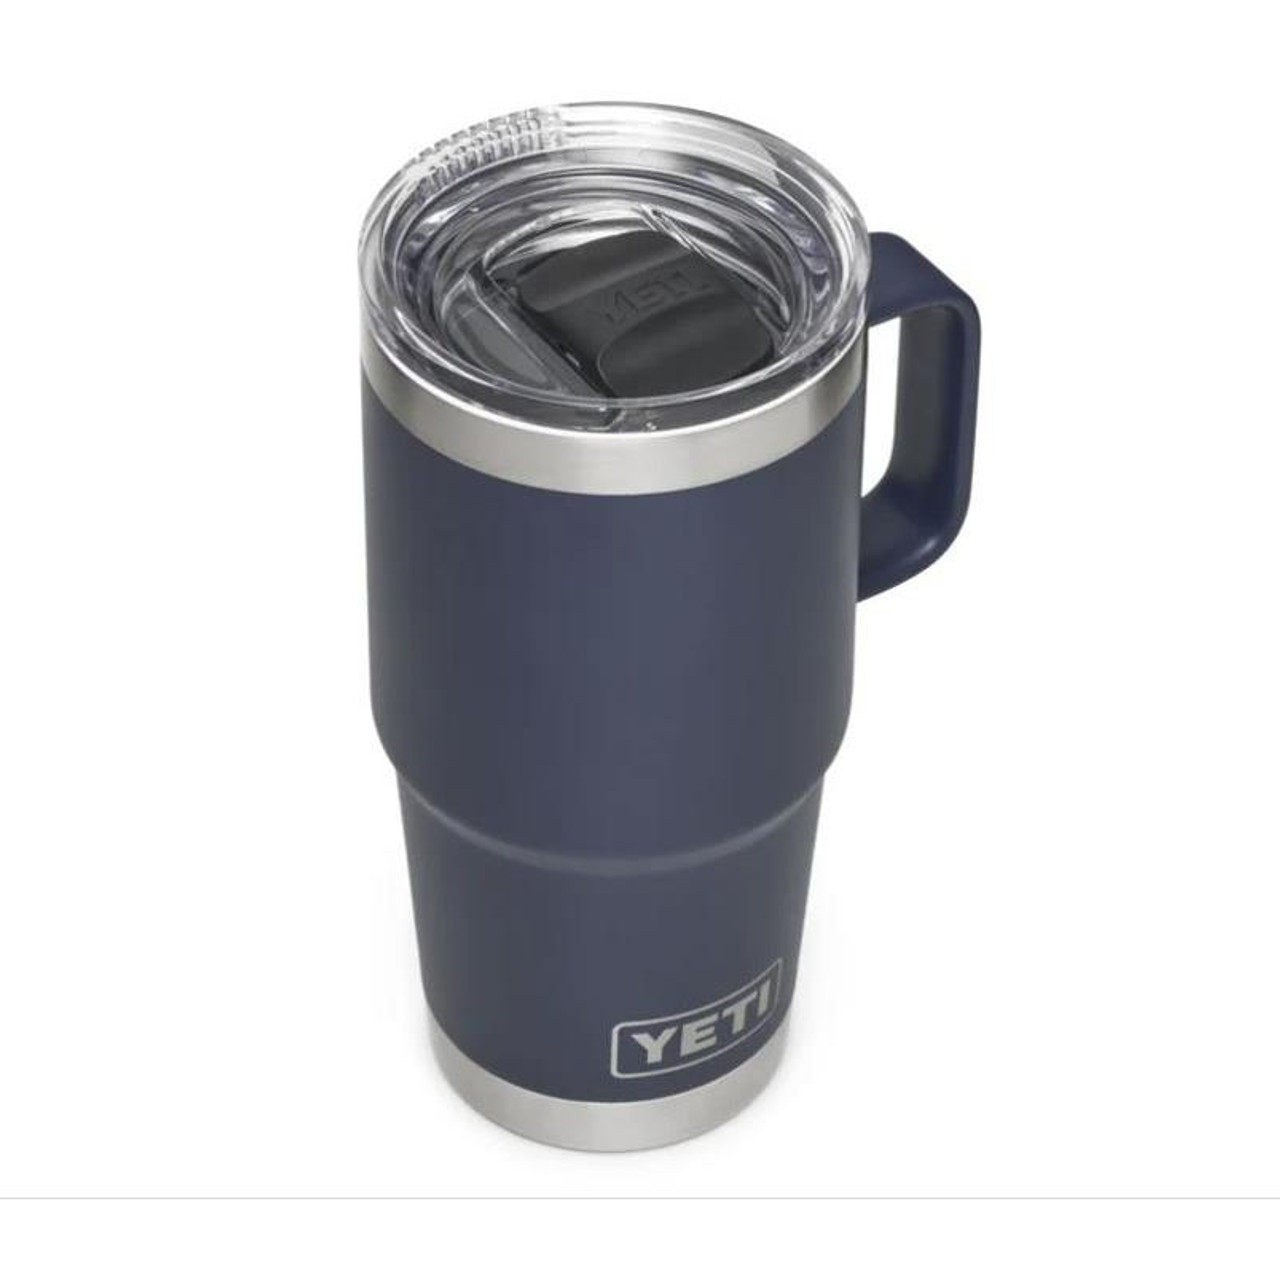 https://cdn11.bigcommerce.com/s-70mih4s/images/stencil/1280x1280/products/19788/48776/Yeti-Rambler-20oz-Travel-Mug-With-Stronghold-Lid-Navy-888830047132_image1__03036.1603574613.jpg?c=2